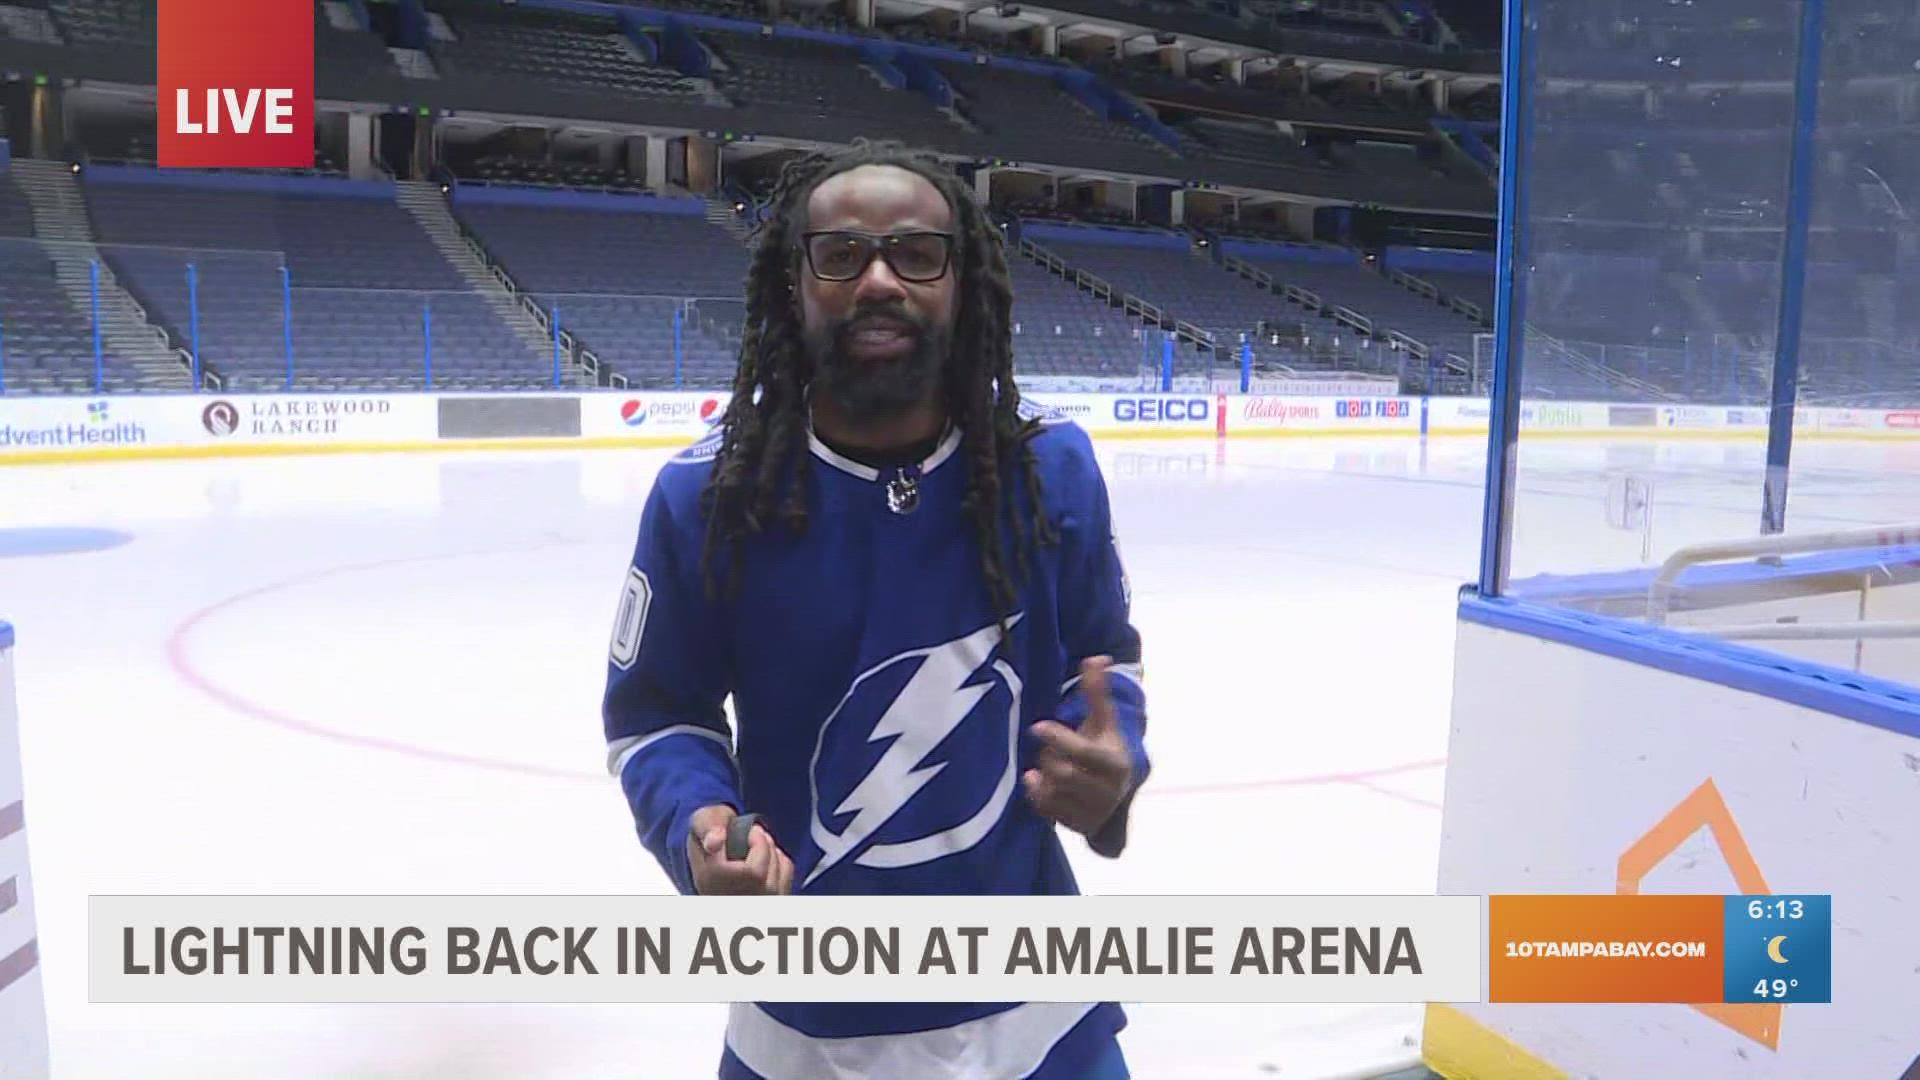 The Tampa Bay Lightning will take on the Montreal Canadiens Wednesday night at Amalie Arena.